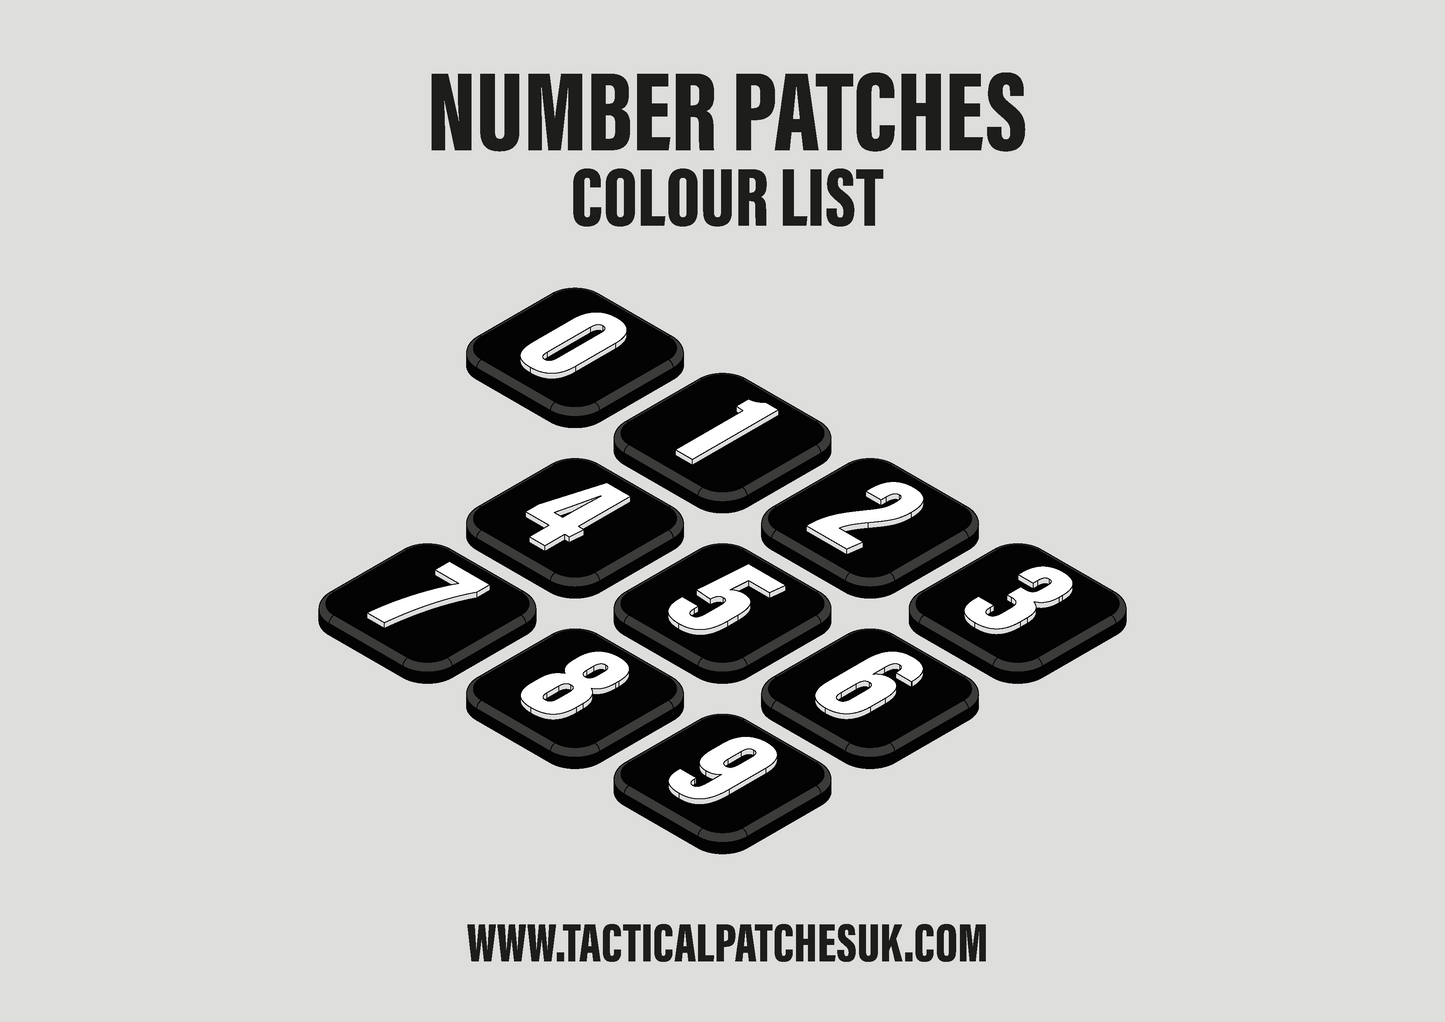 Numbers 1x1 Velcro Patches - Black Background